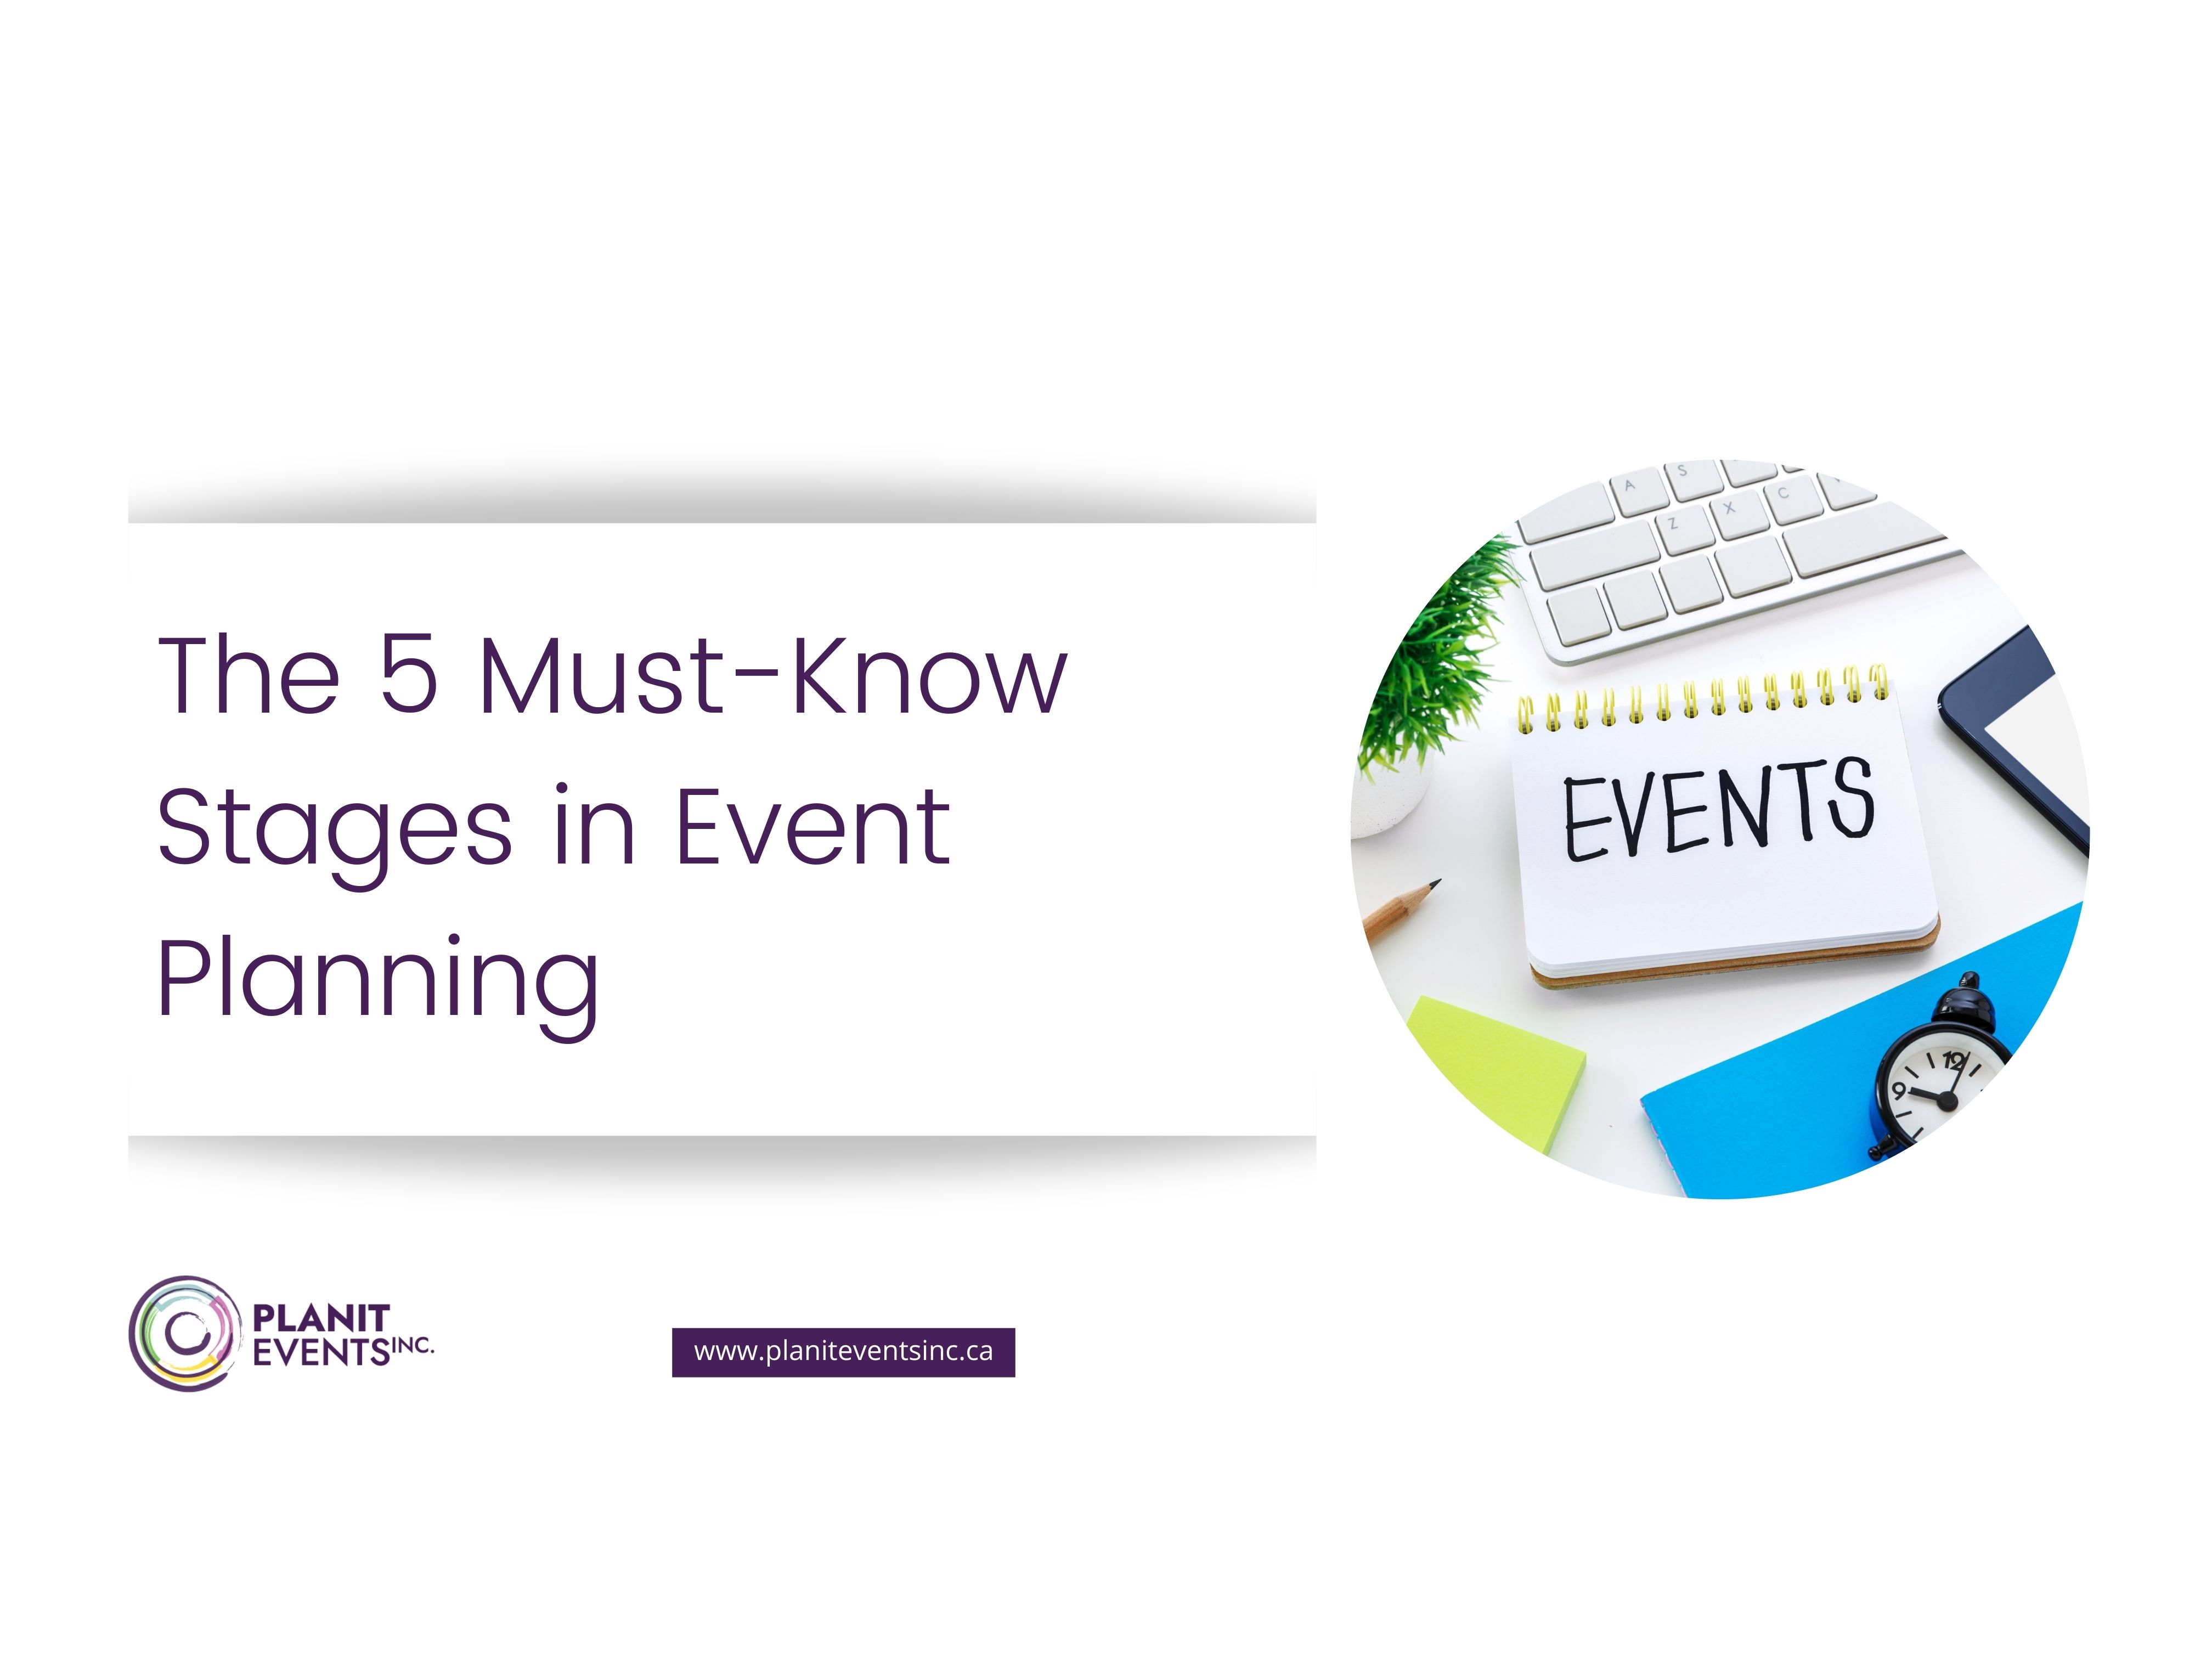 5 Must-Know Stages of Event Planning